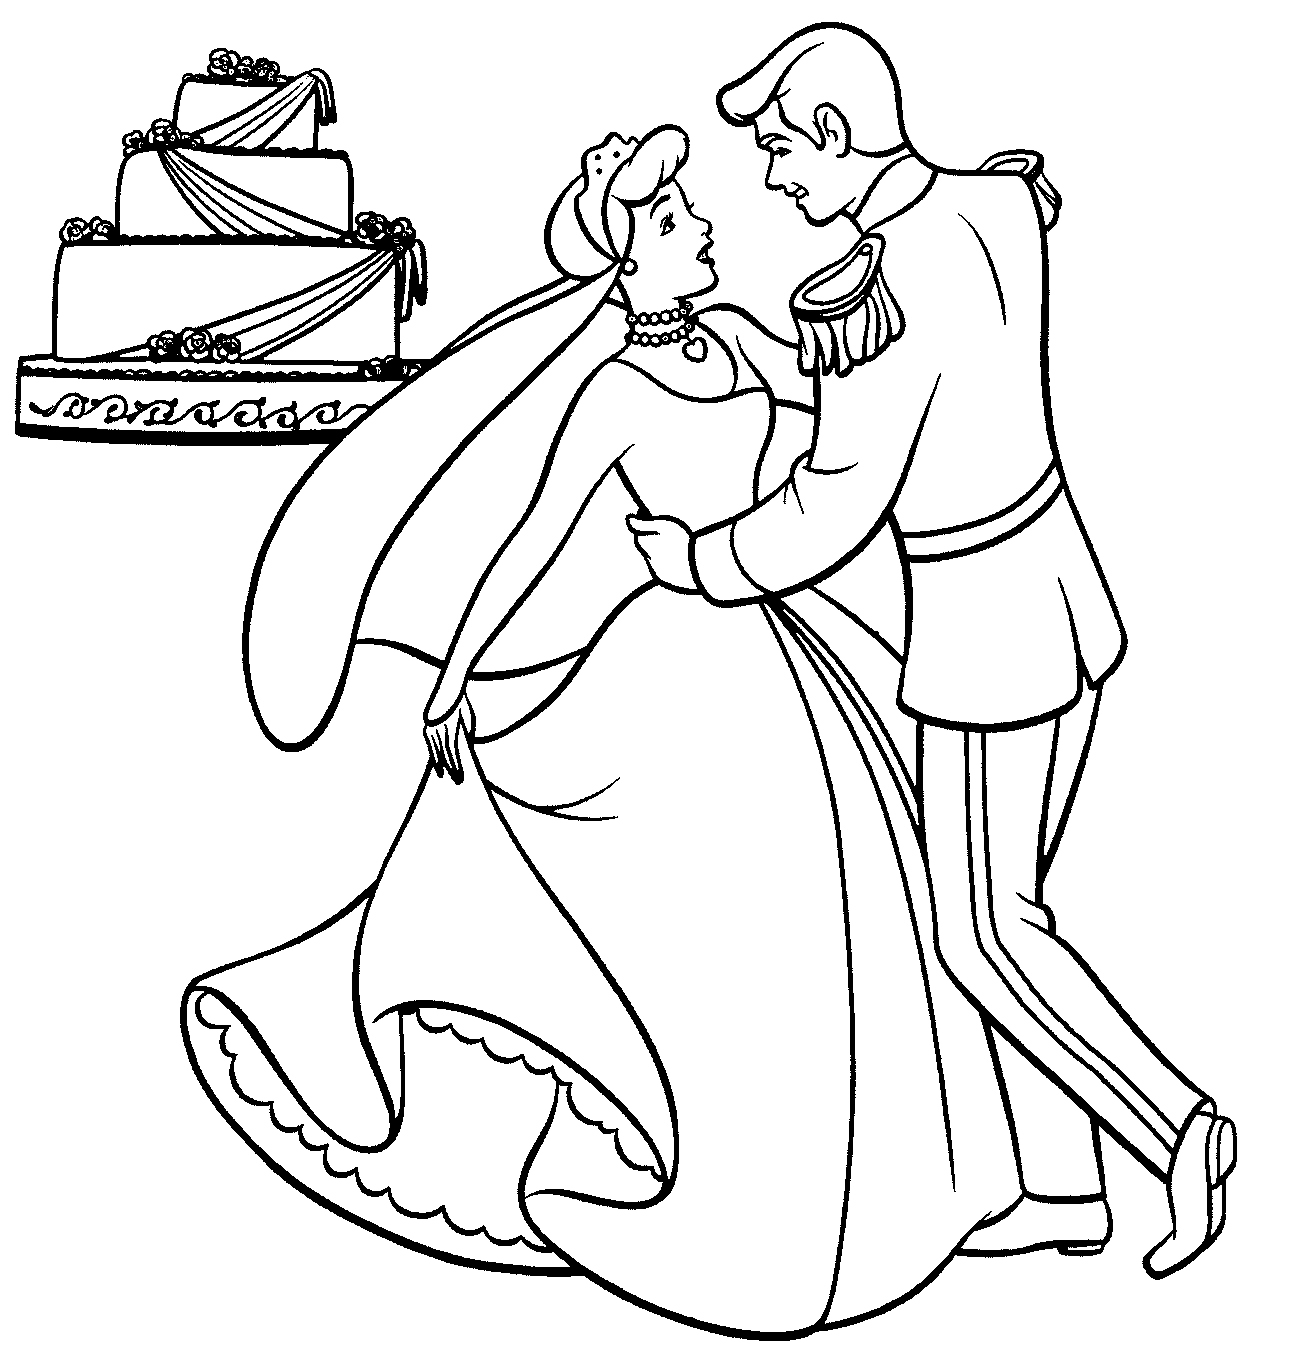 Cinderella Coloring Pages | Team colors